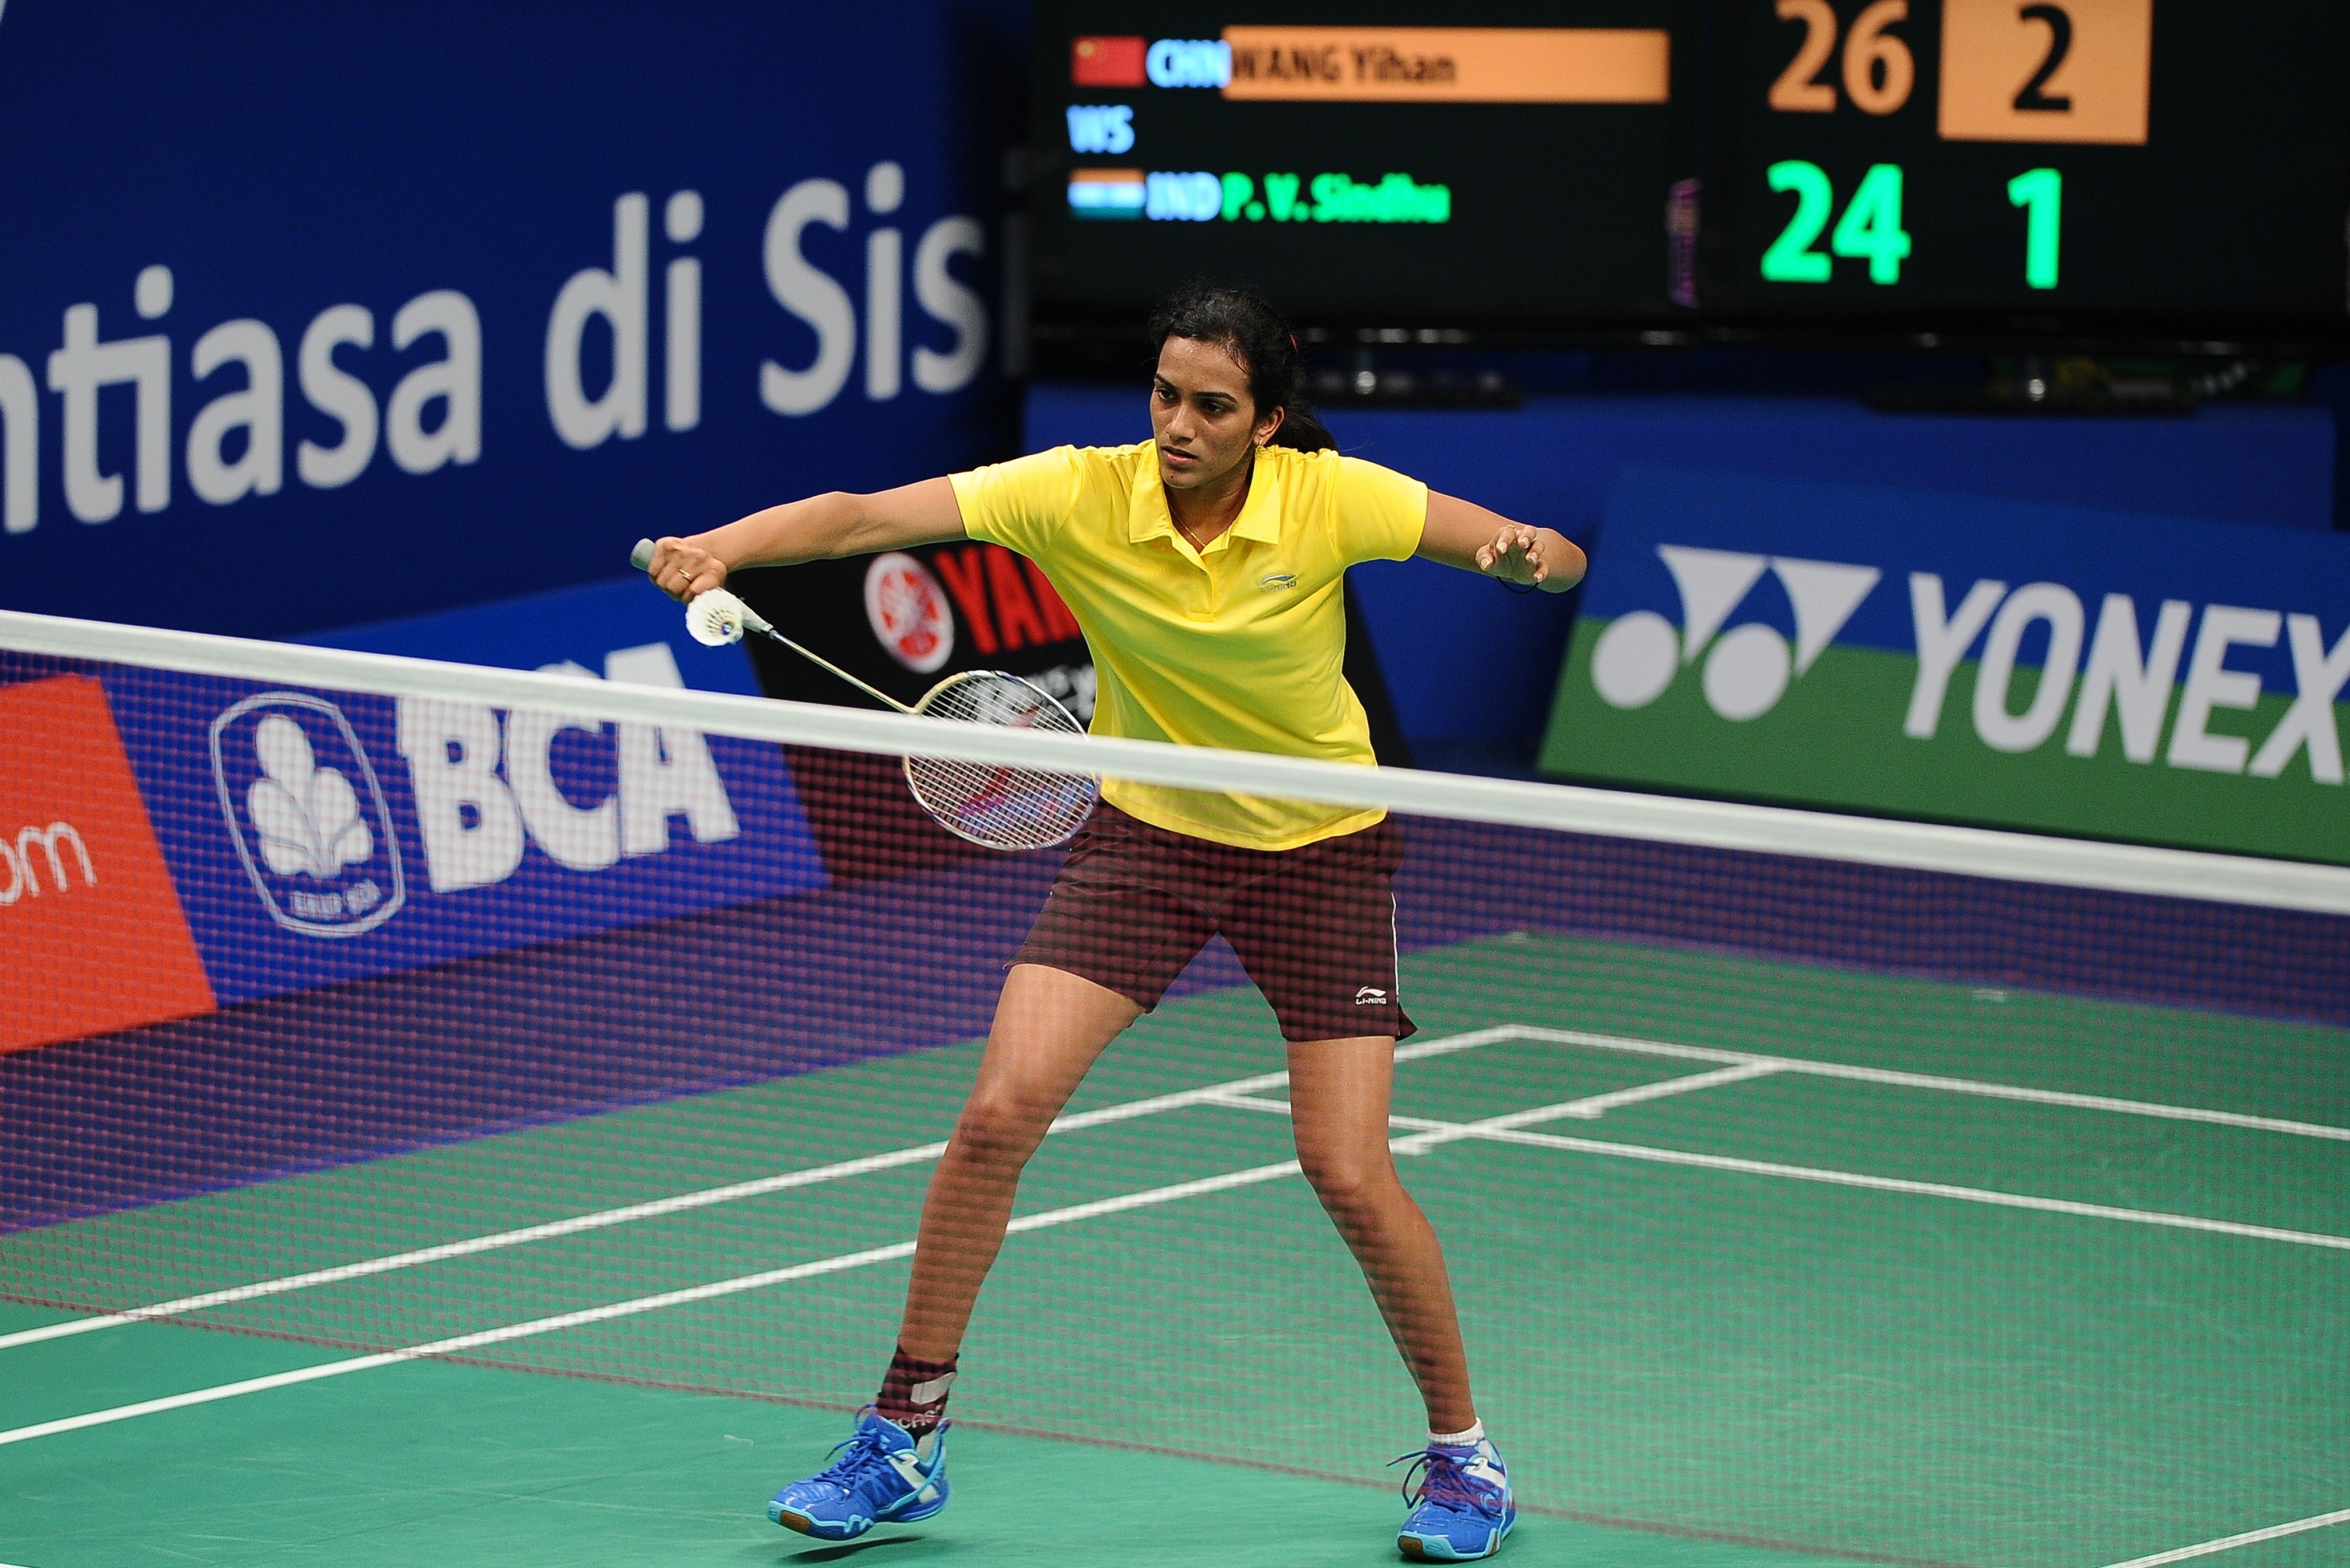 2021 Denmark Open PV Sindhu, Kidambi Srikanth progress to second round with easy wins